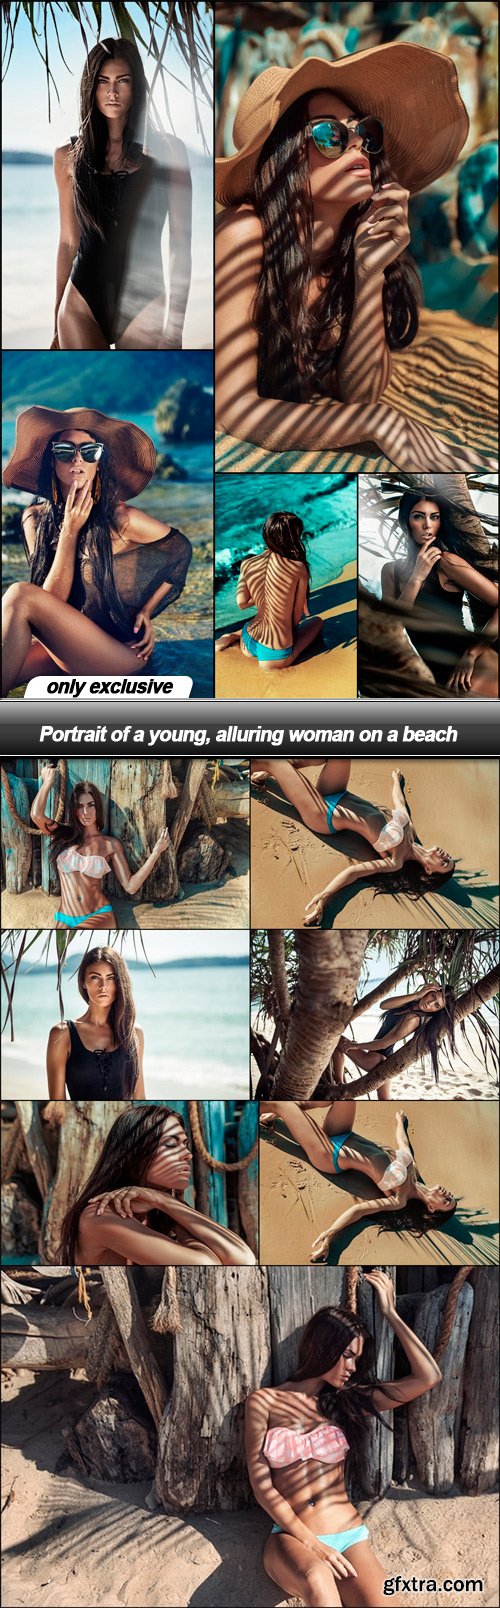 Portrait of a young, alluring woman on a beach - 12 UHQ JPEG